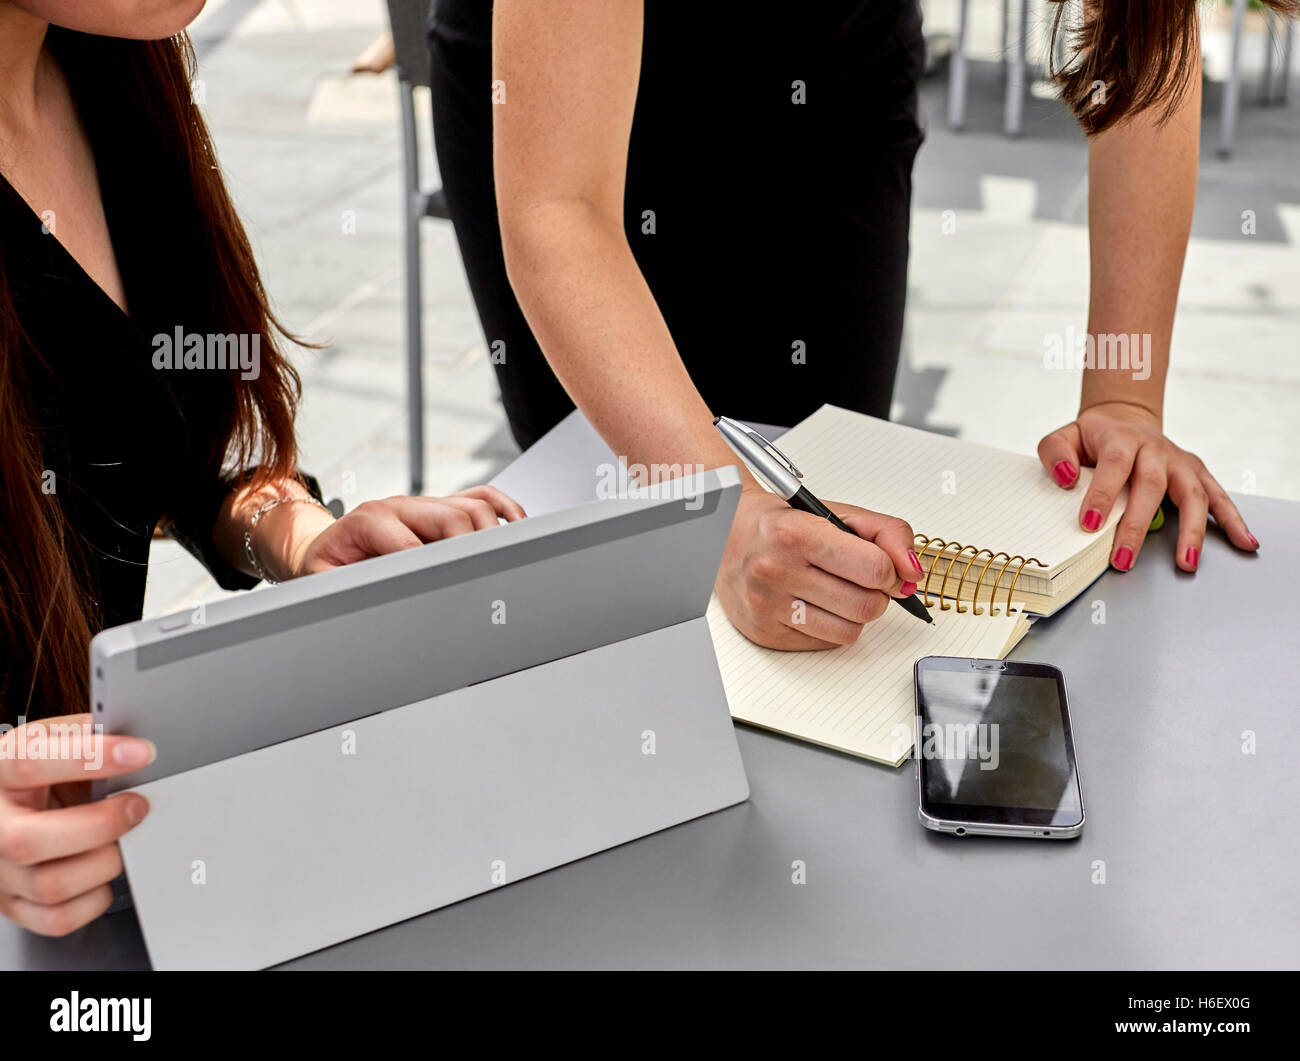 Two women one sitting one standing over a table prepared to write on paper while the other uses a tablet and a cell phone on the Stock Photo